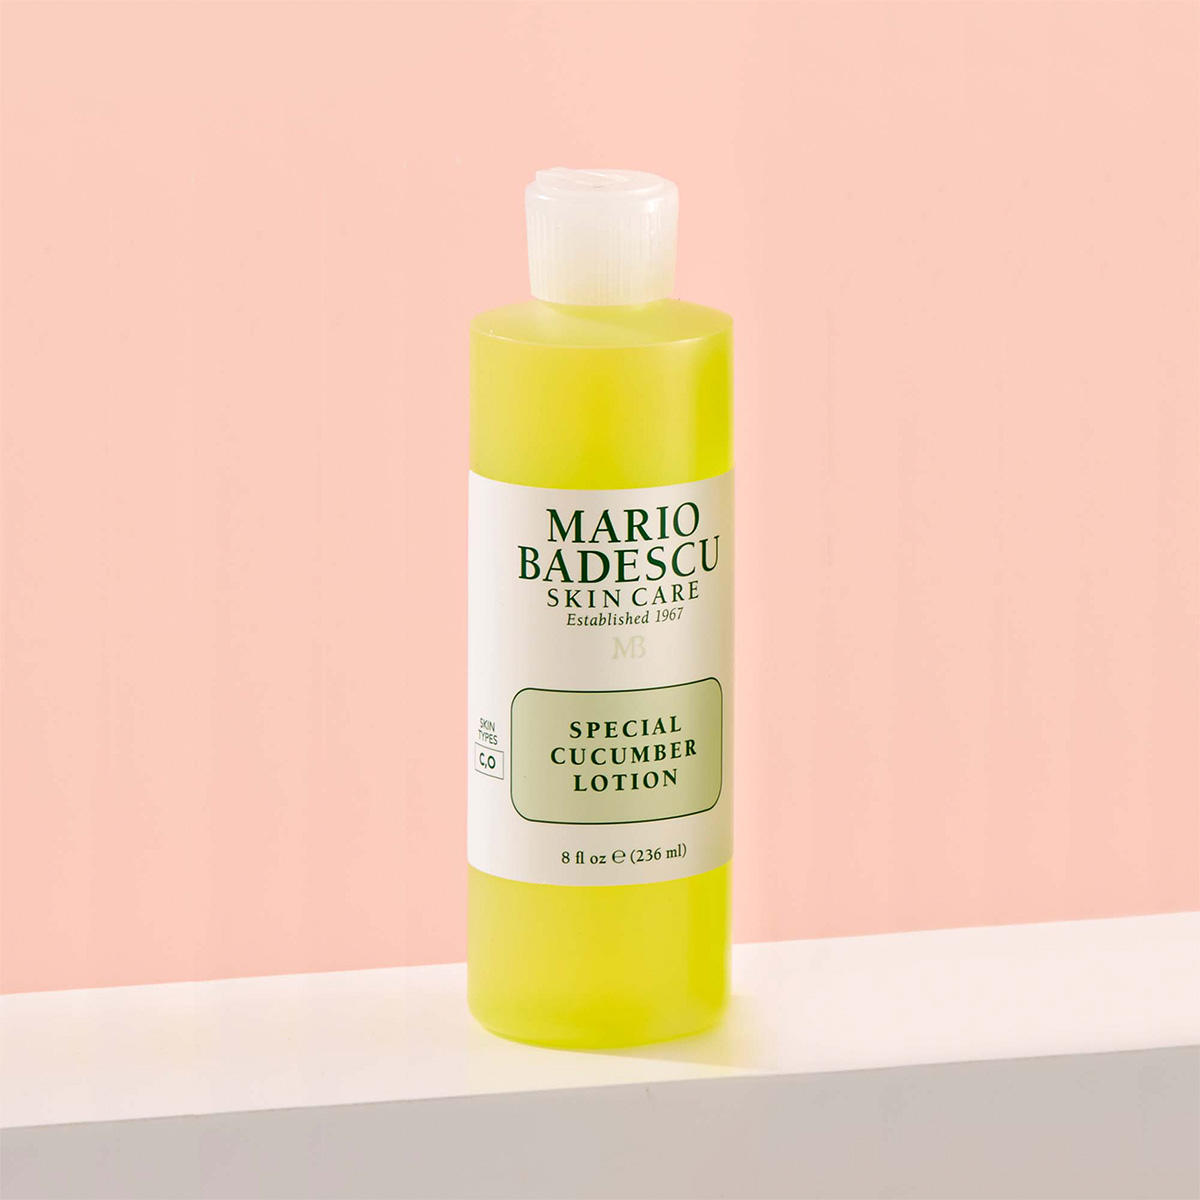 MARIO BADESCU Special Cleansing Lotion "O" 236 ml - 3